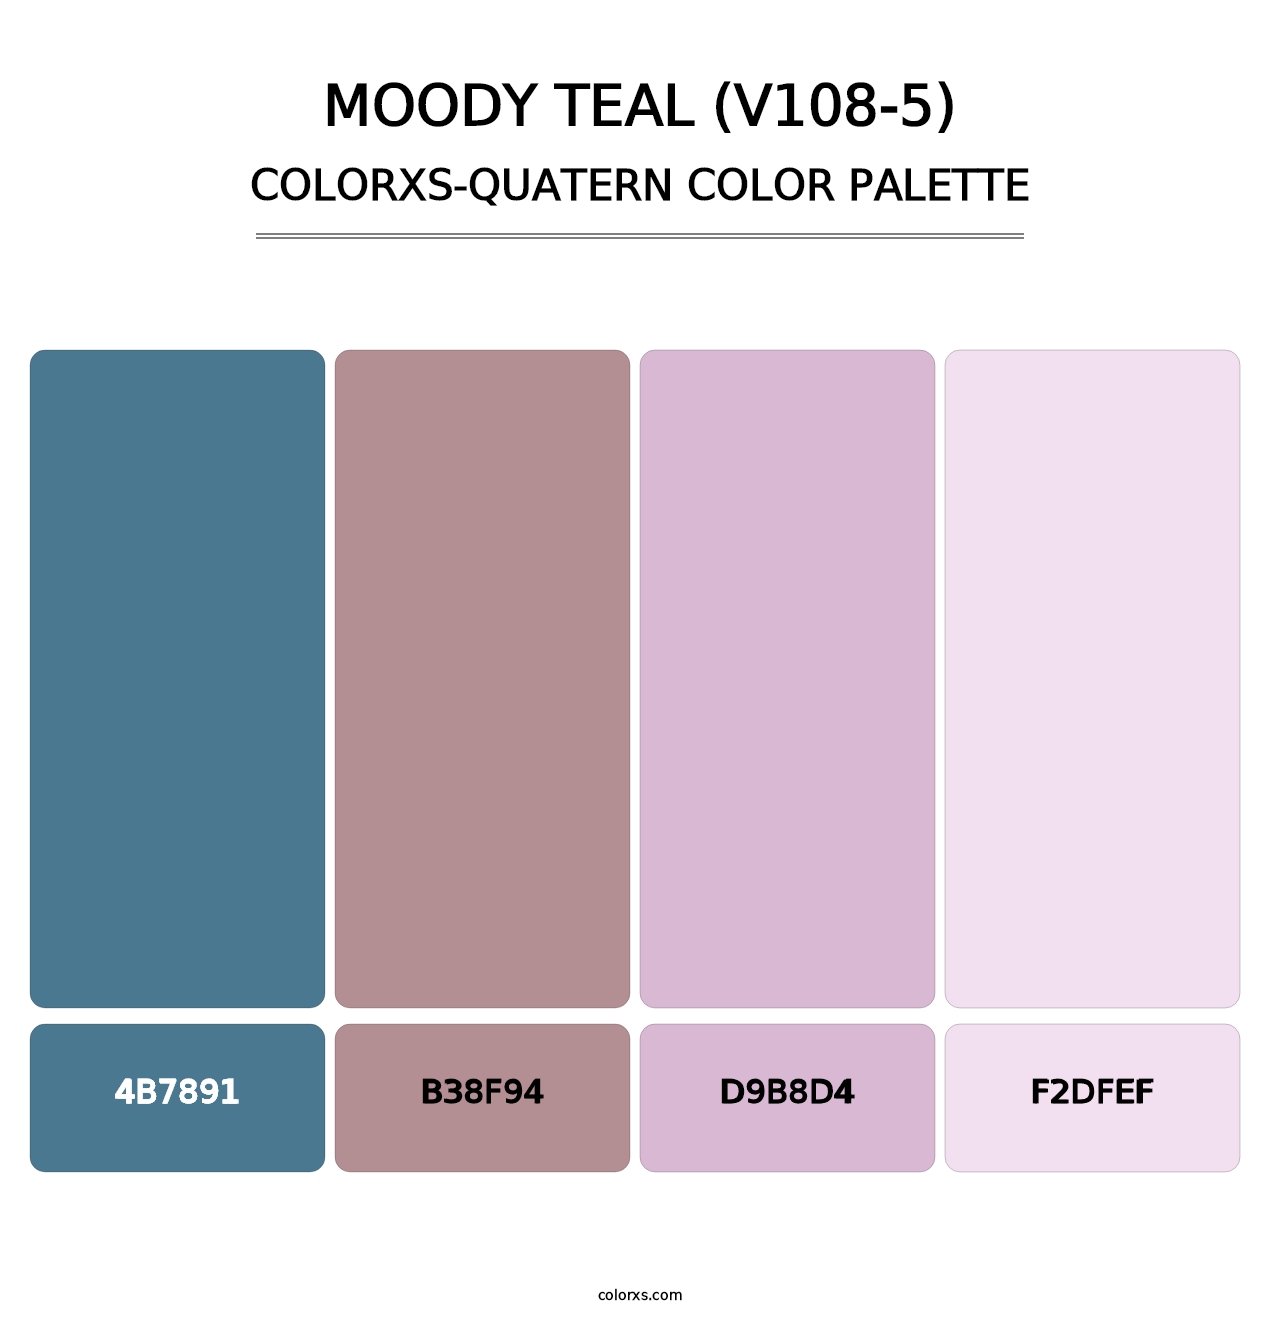 Moody Teal (V108-5) - Colorxs Quatern Palette